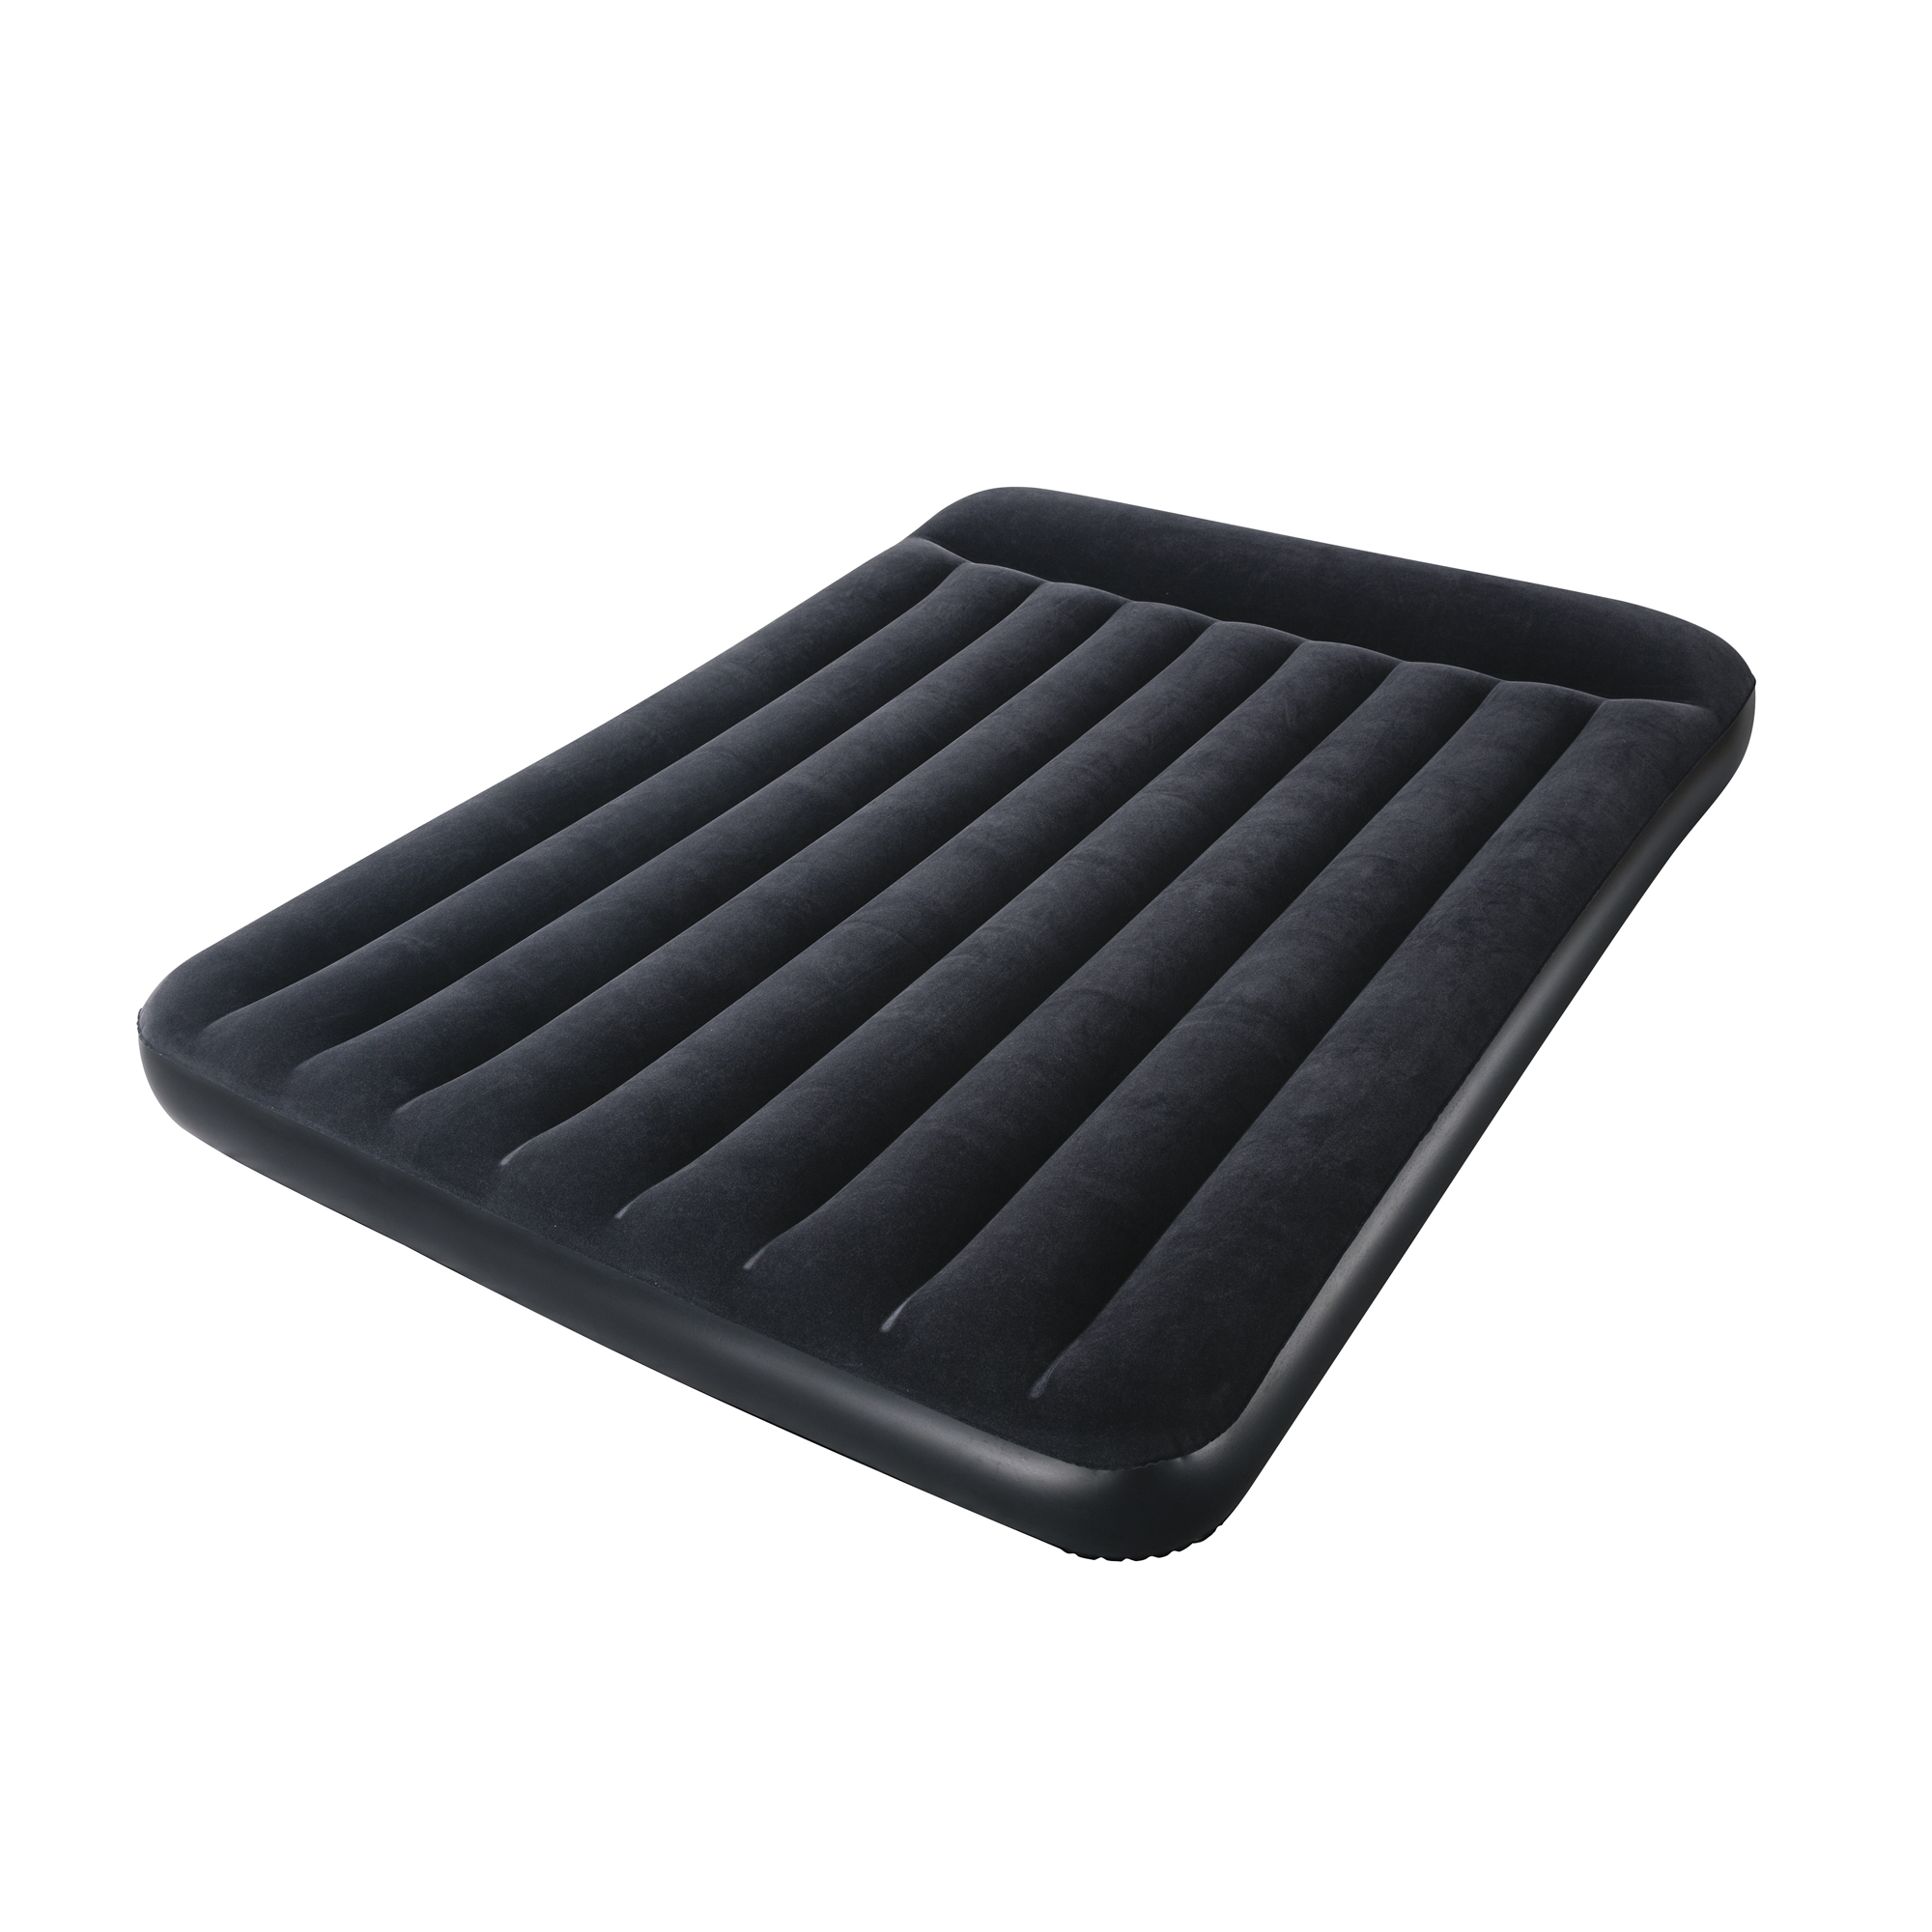 UPC 821808674657 product image for Bestway Aerolax Raised Queen Air Bed with Built-in Pump | upcitemdb.com